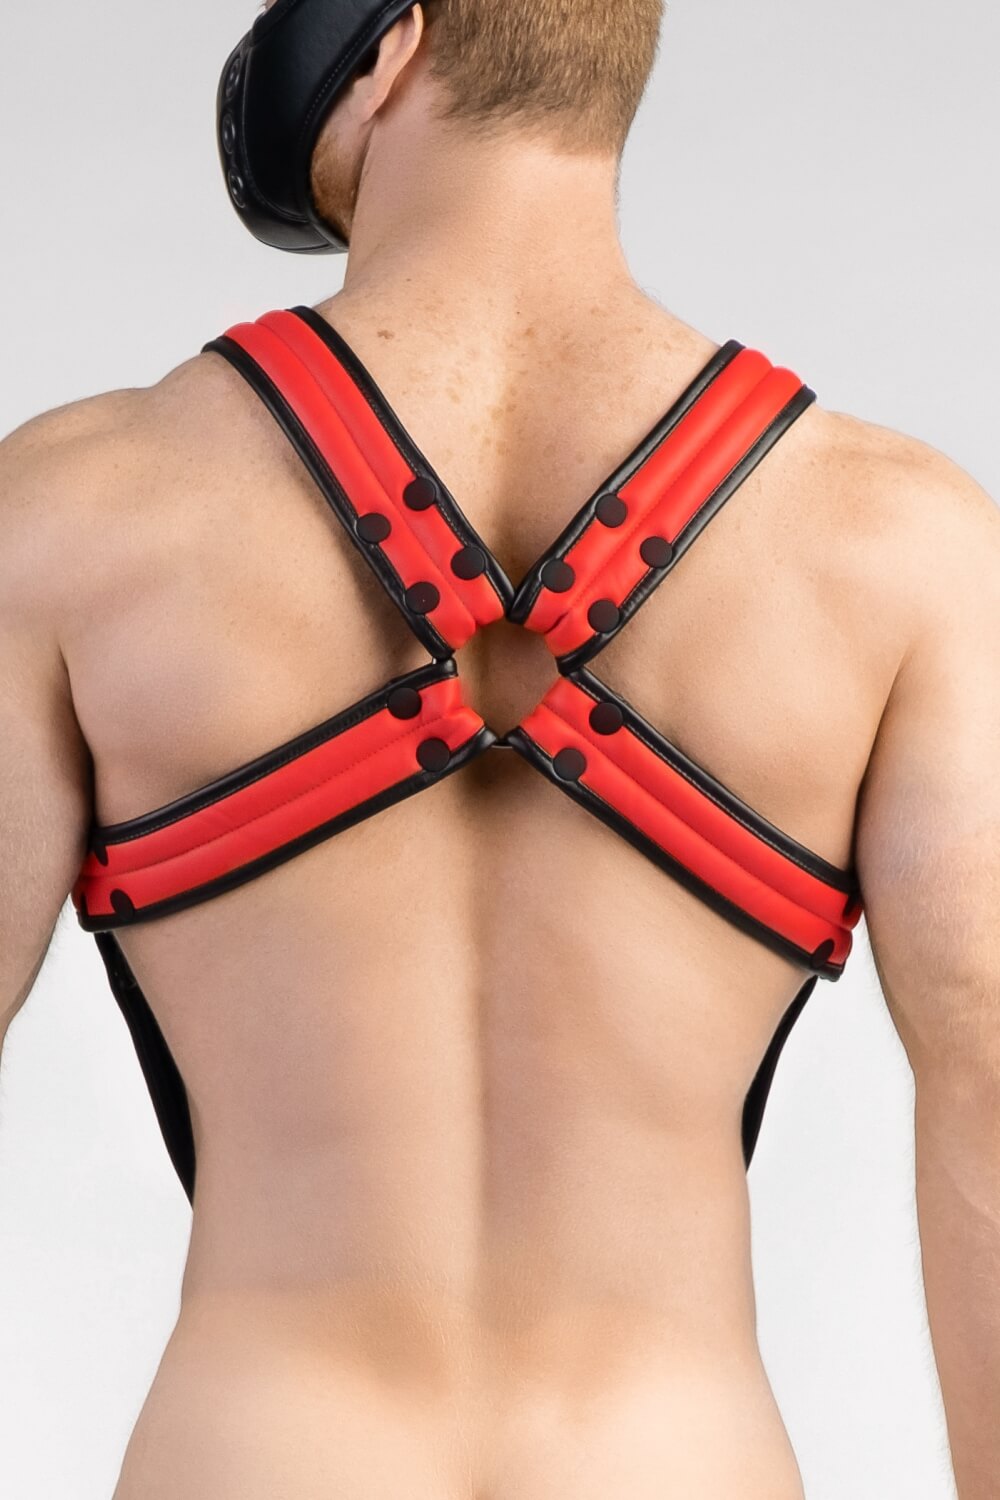 Armored Next. Body Harness. Red+Black